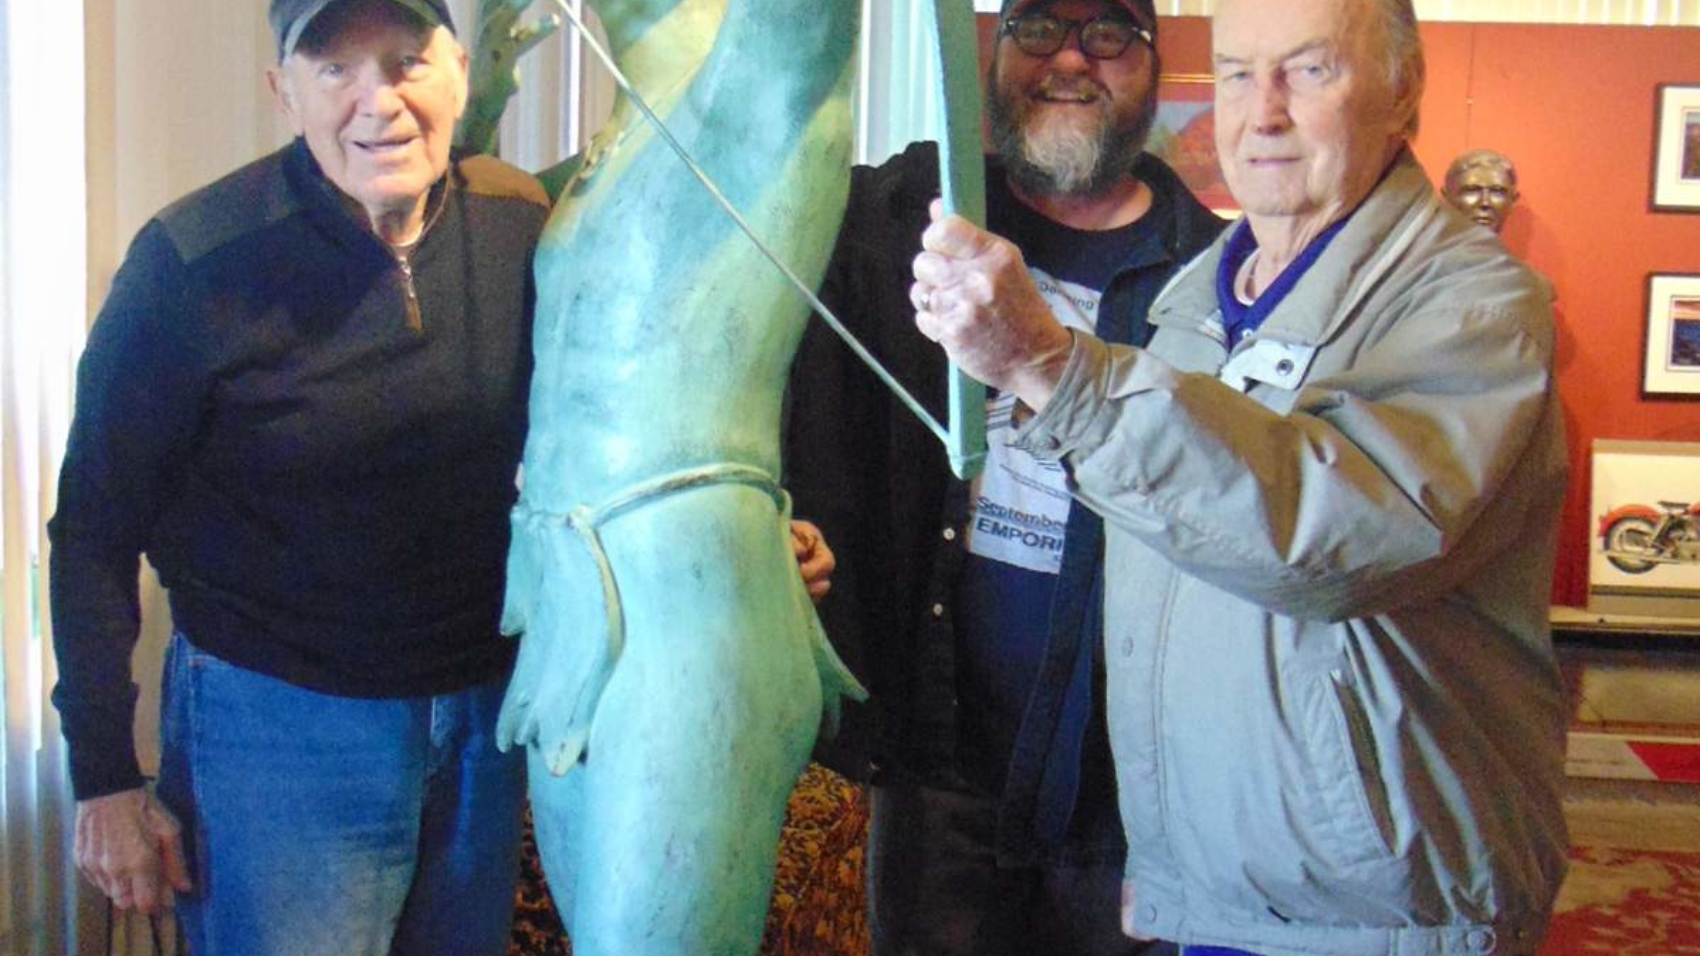 Dick, Jack and Richie with the sculpture.